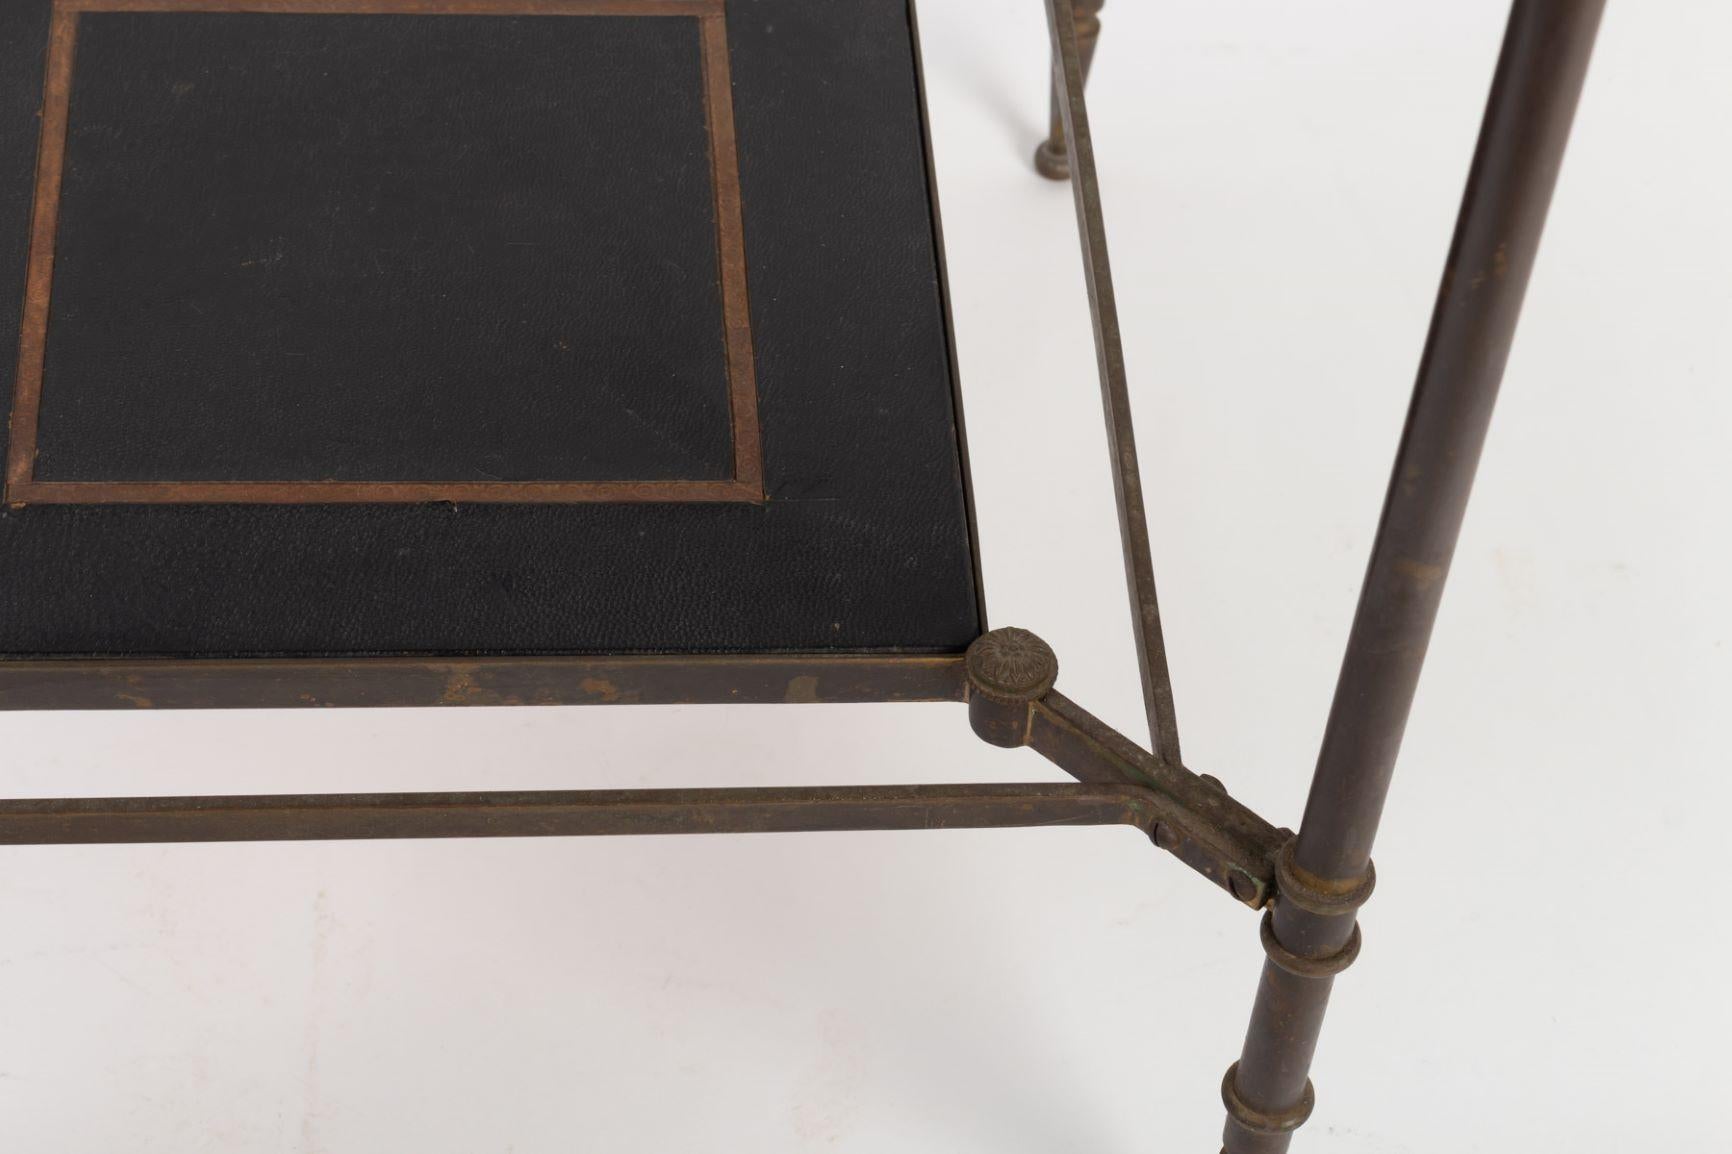 Elegant Pair of Small Square Side Tables Attributed to Maison Jansen 1940s-1950s For Sale 2